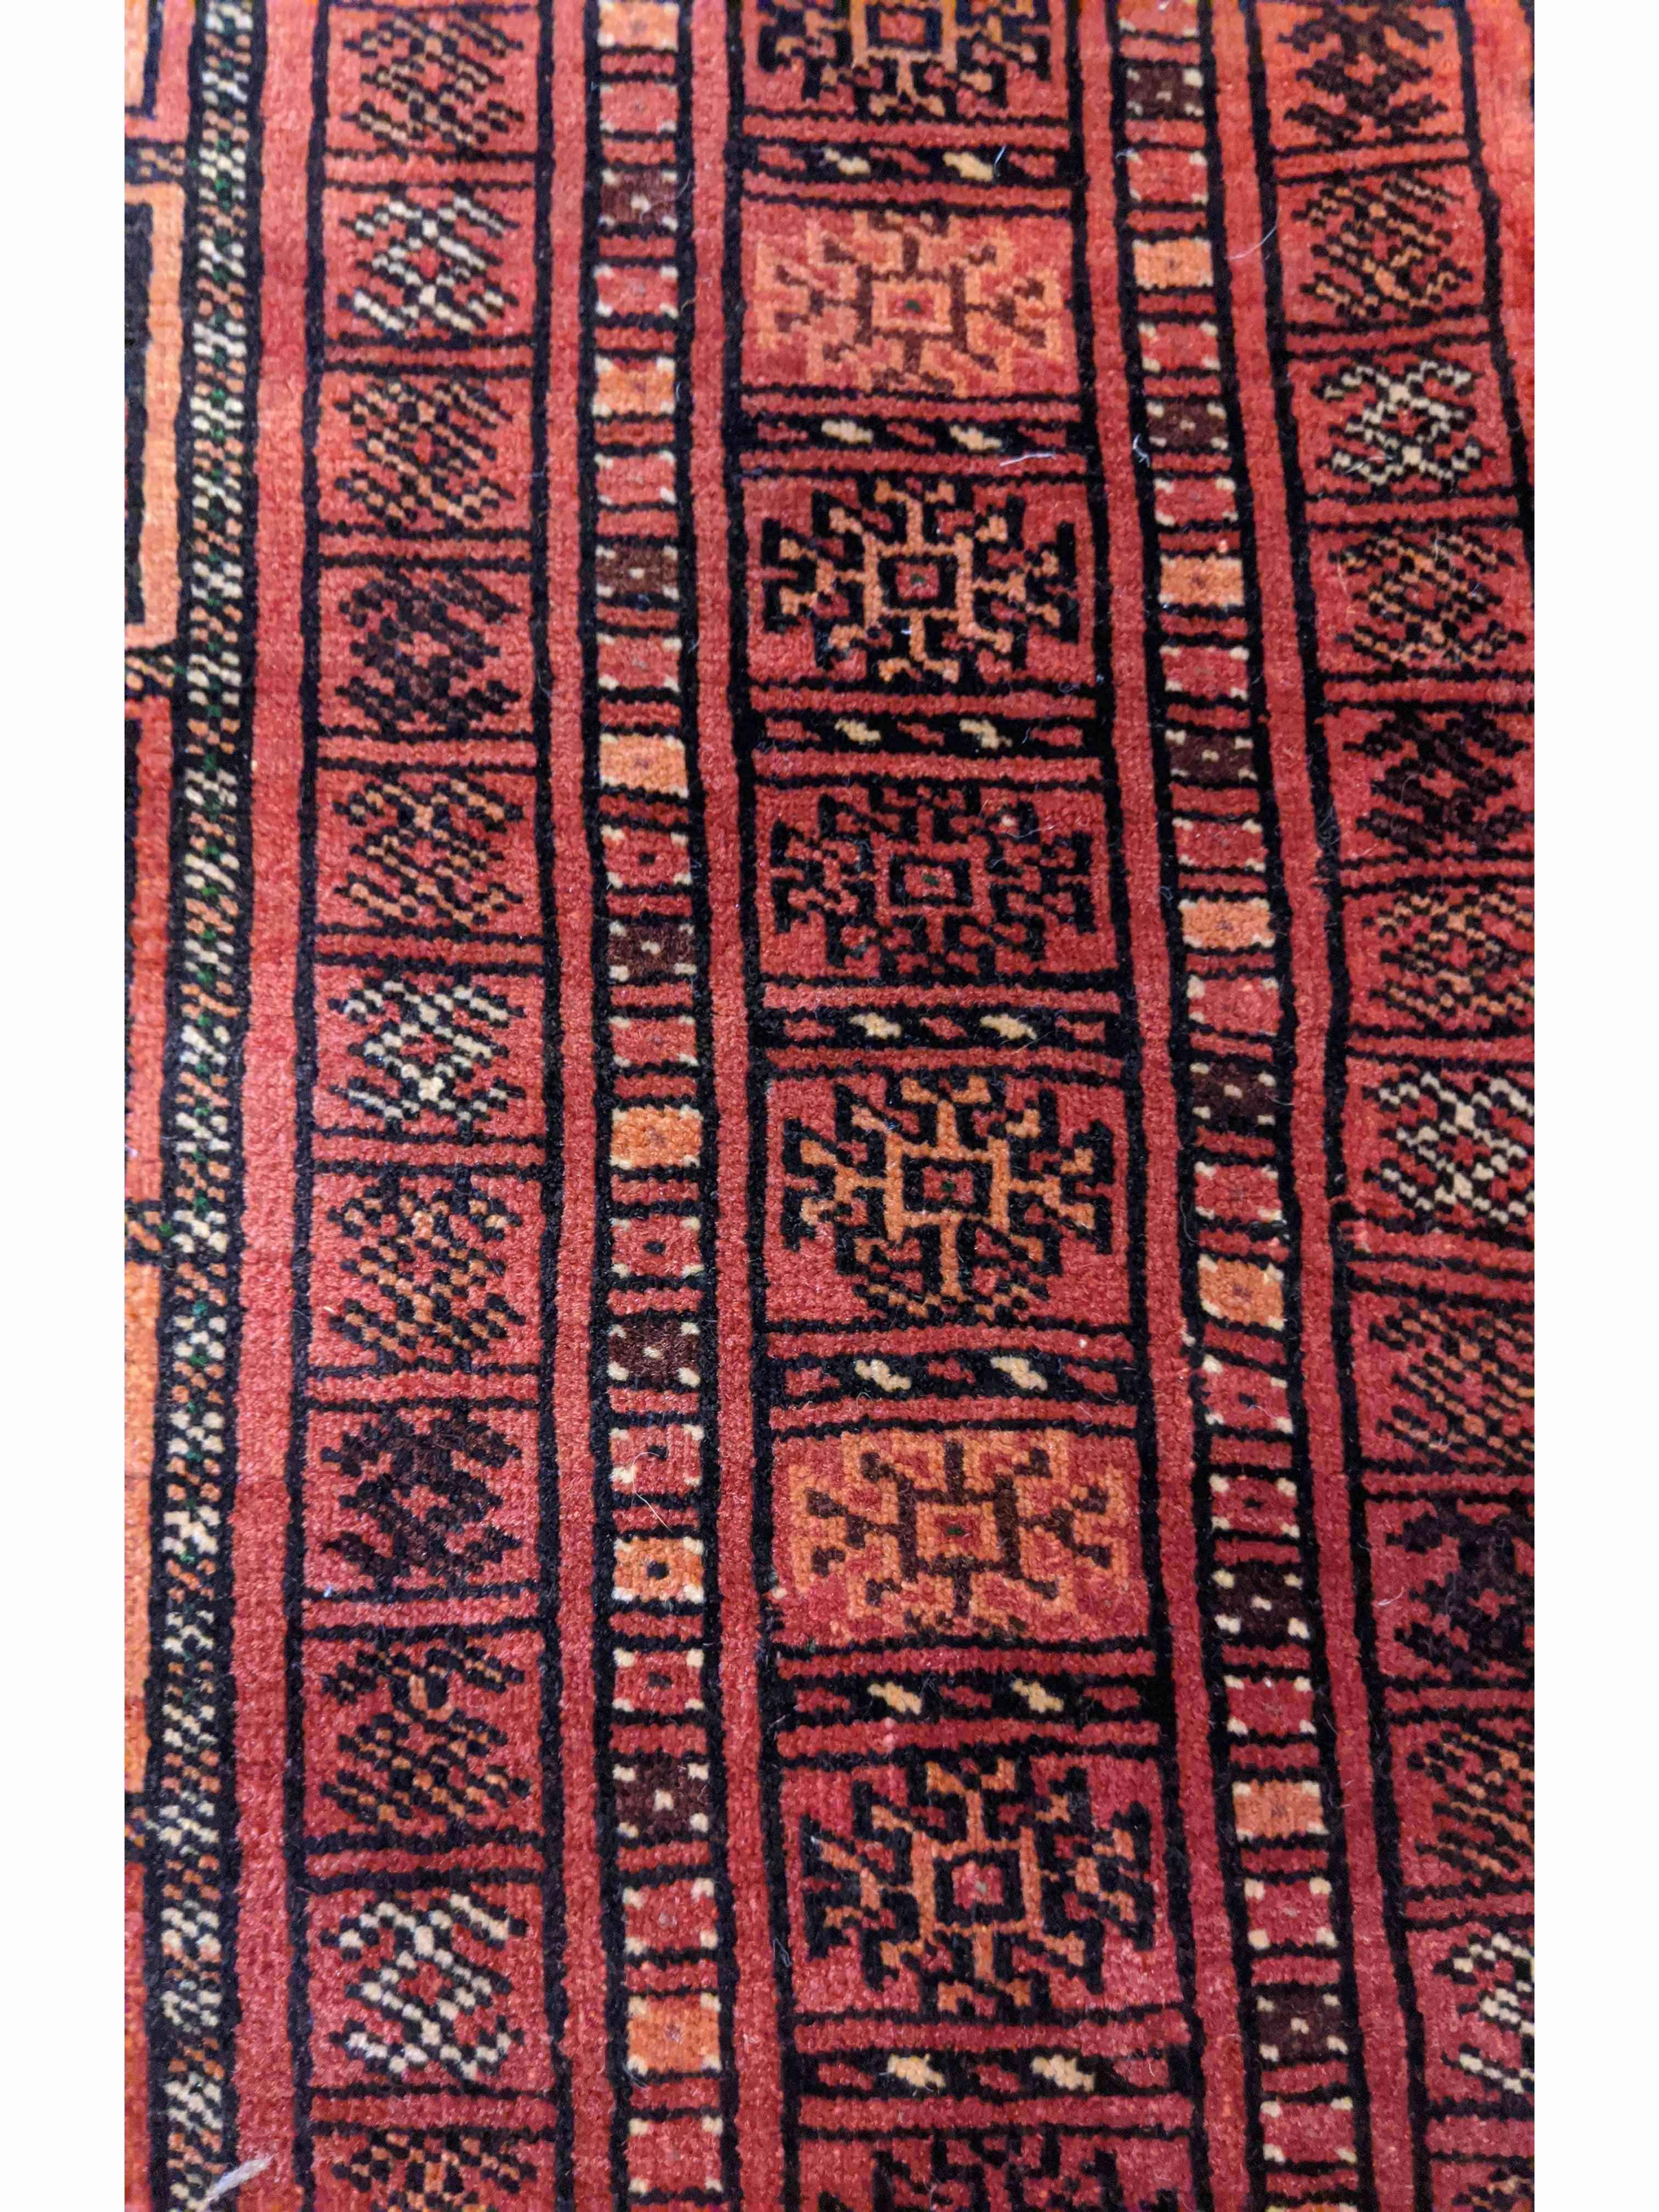 150 x 106 cm Fine Persian Baluch Traditional Terracotta Rug - Rugmaster